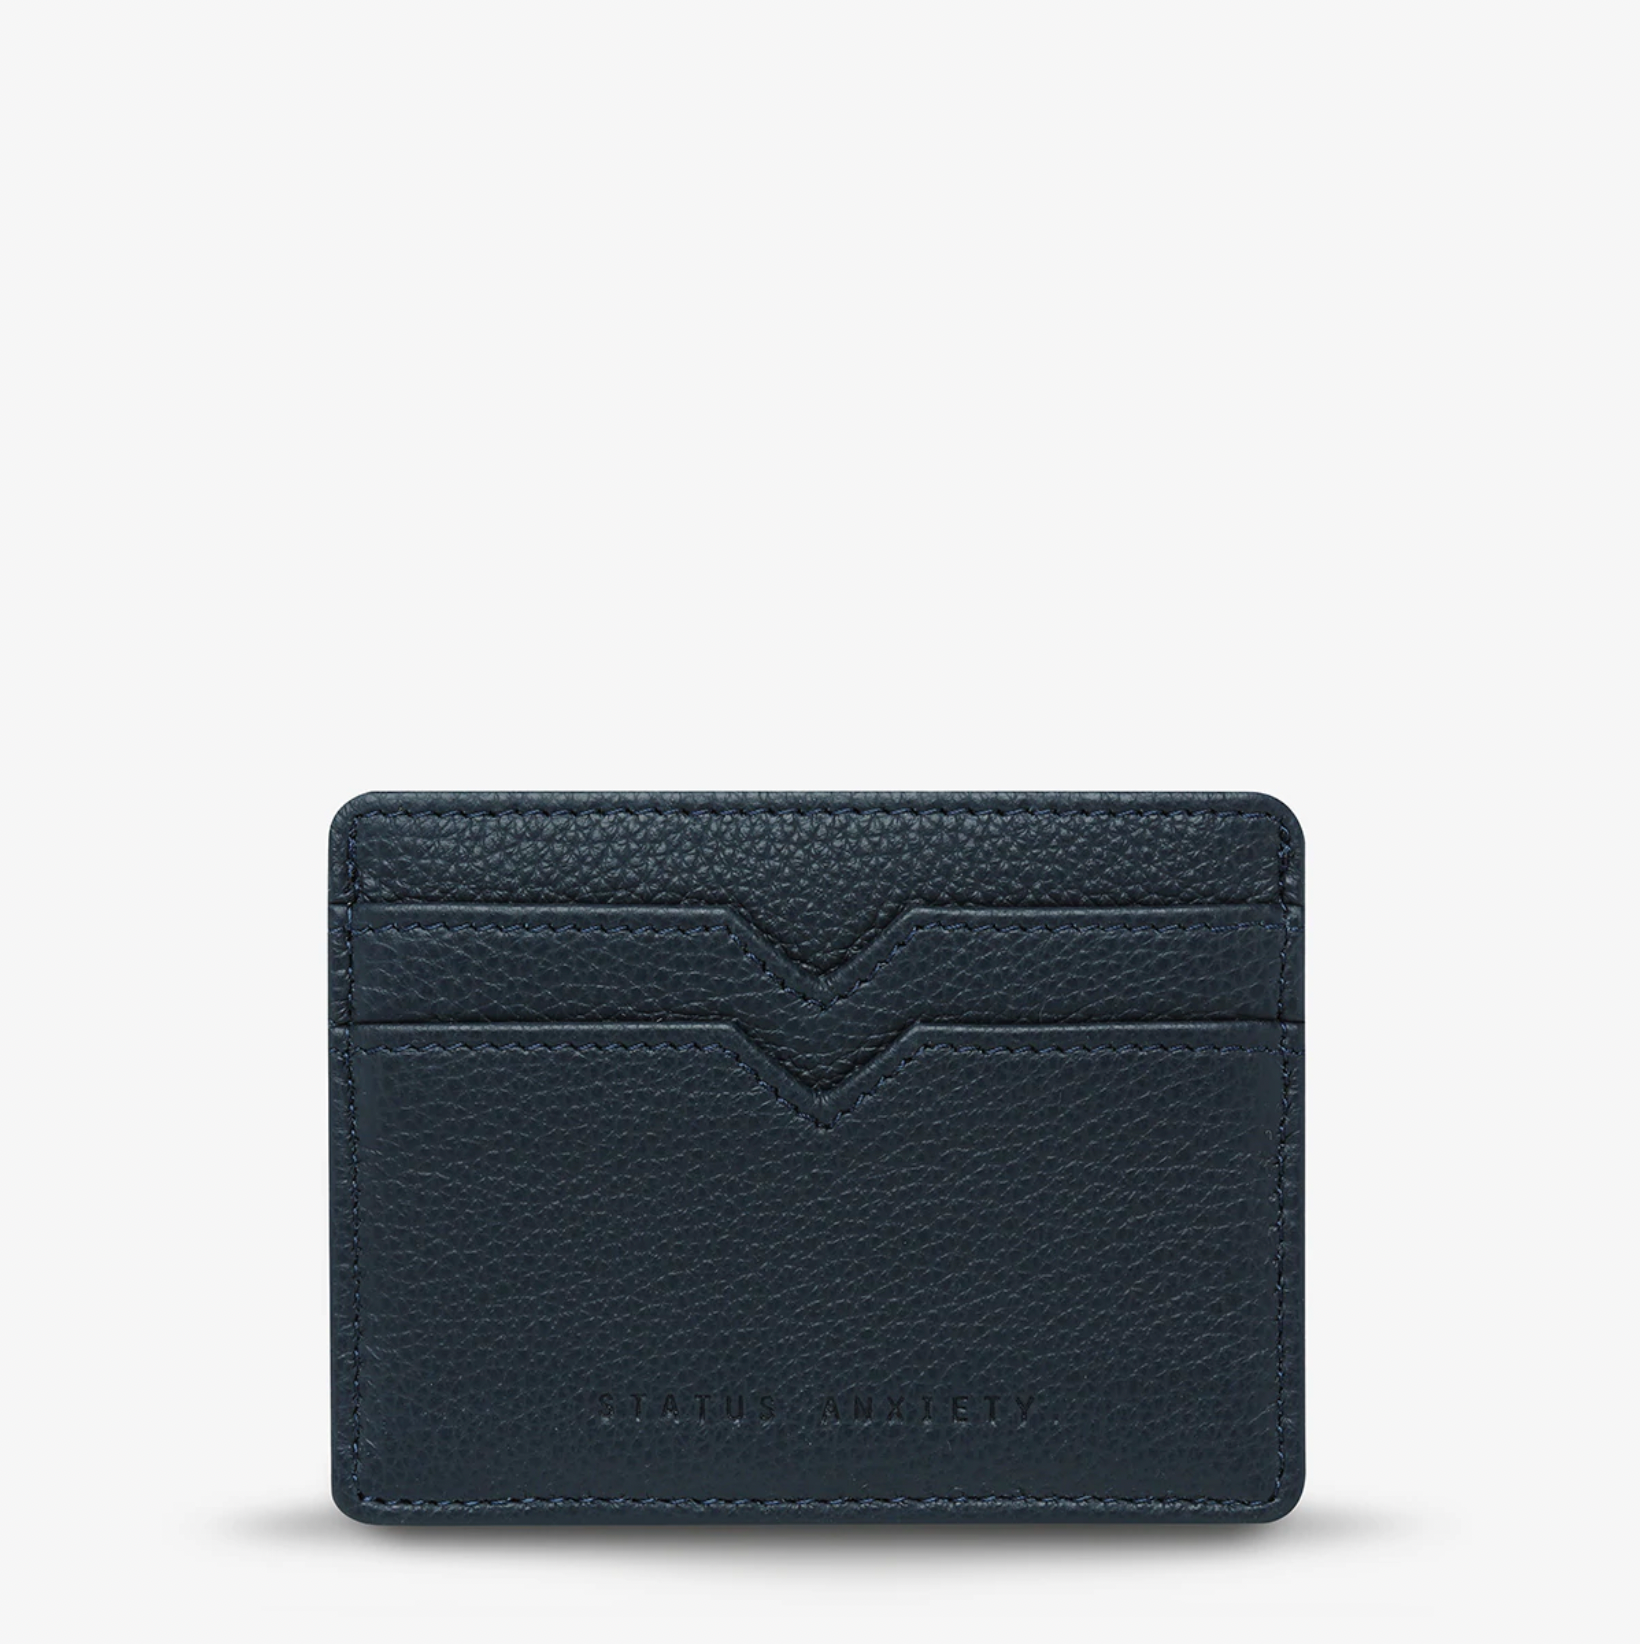 Status Anxiety Together For Now Wallet in Navy Blue